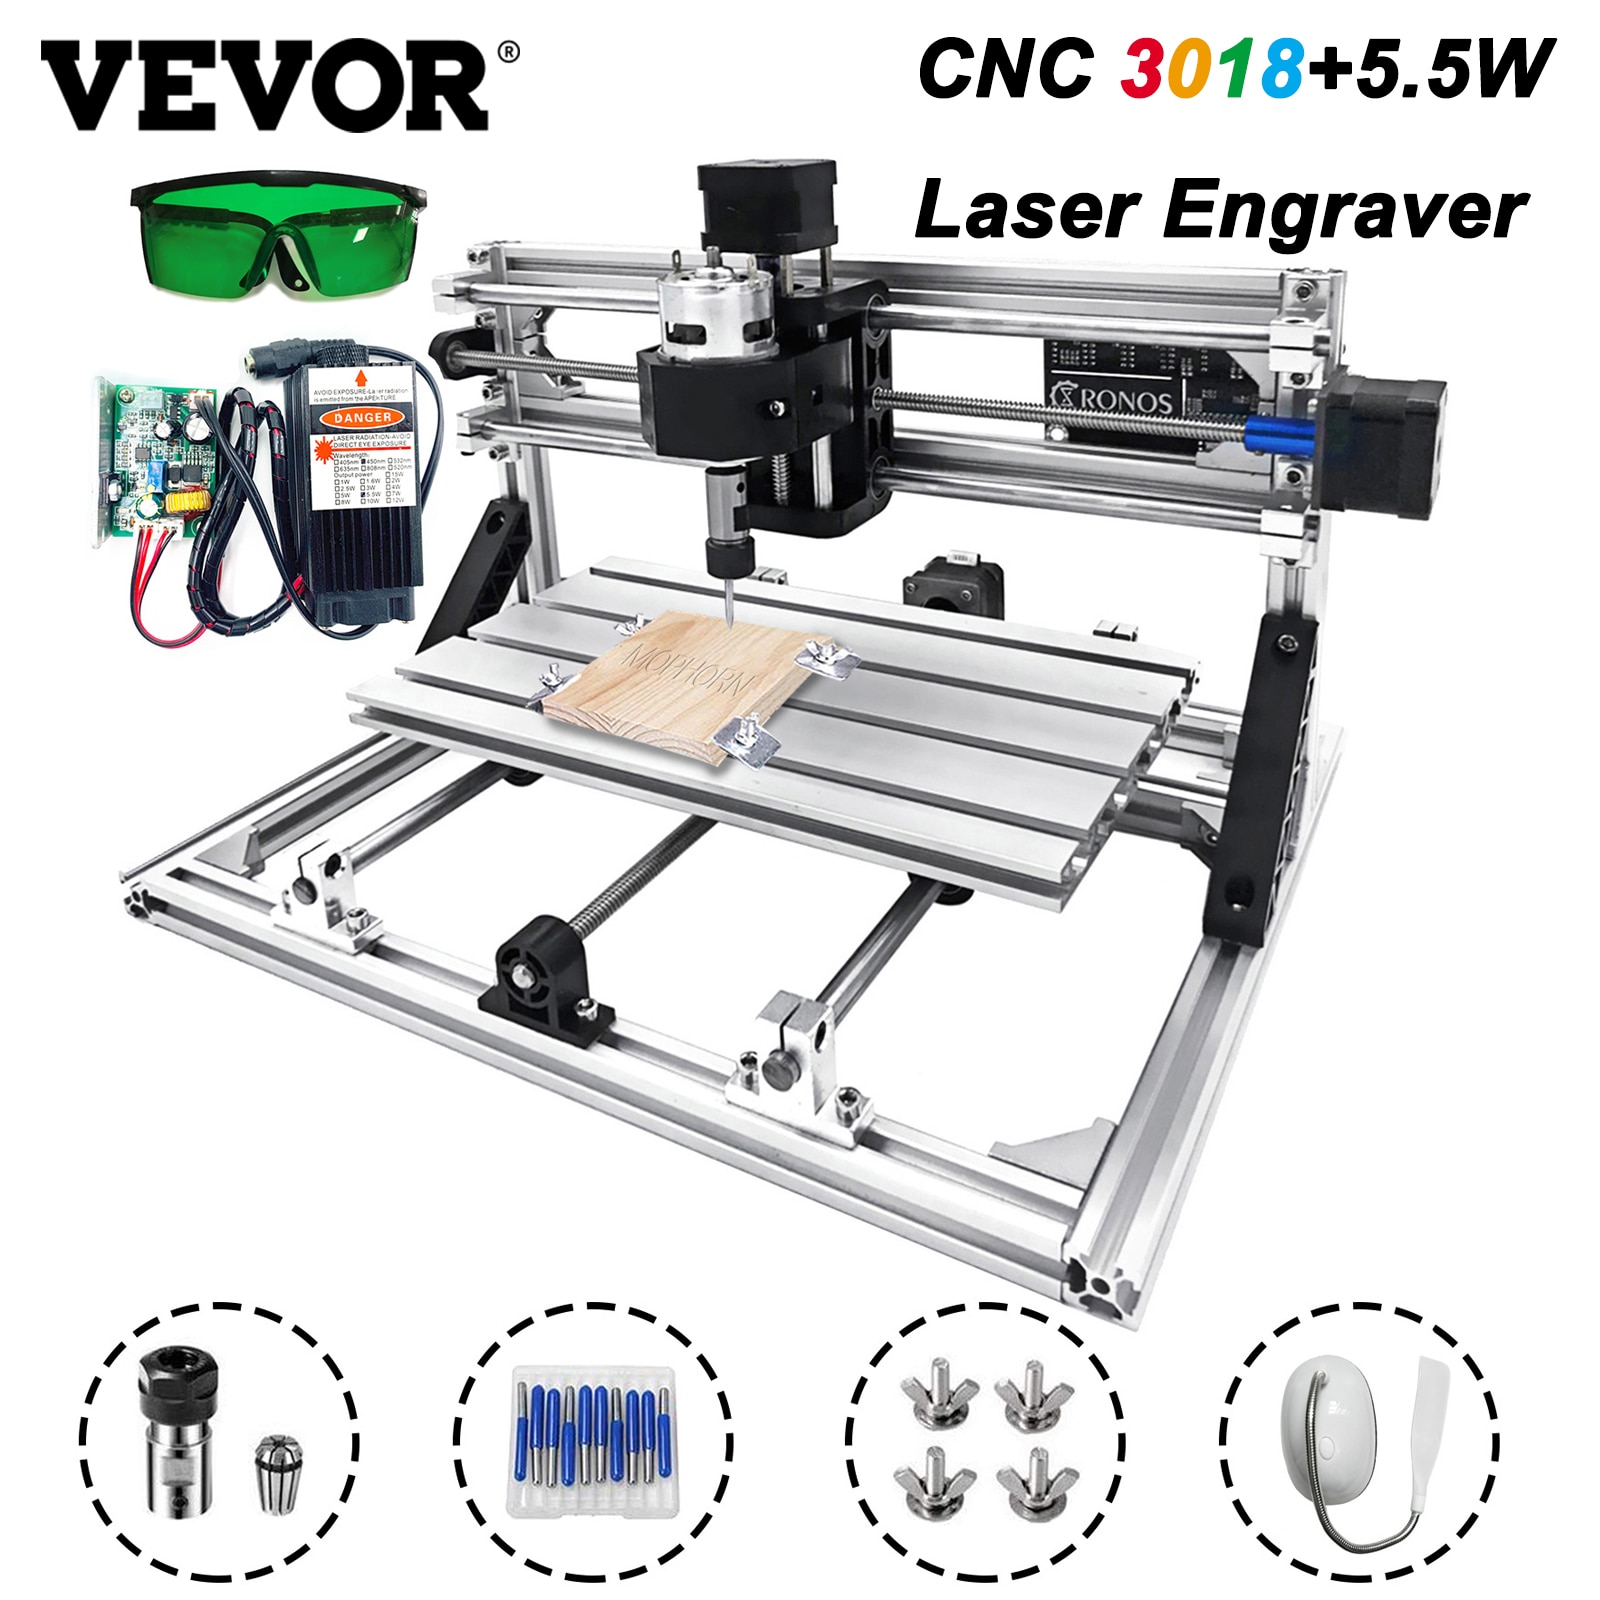 450nm 5.5W Laser Engraving Machine Adjustable Focal Length Support PC Software High Speed Mini CNC Laser Engraver Cutter Precise Carver Printer for DIY Craft Brand Making Wood Leather Fabric Paper Cutting Engraving - ArrisWeb.com - Arrisweb.com